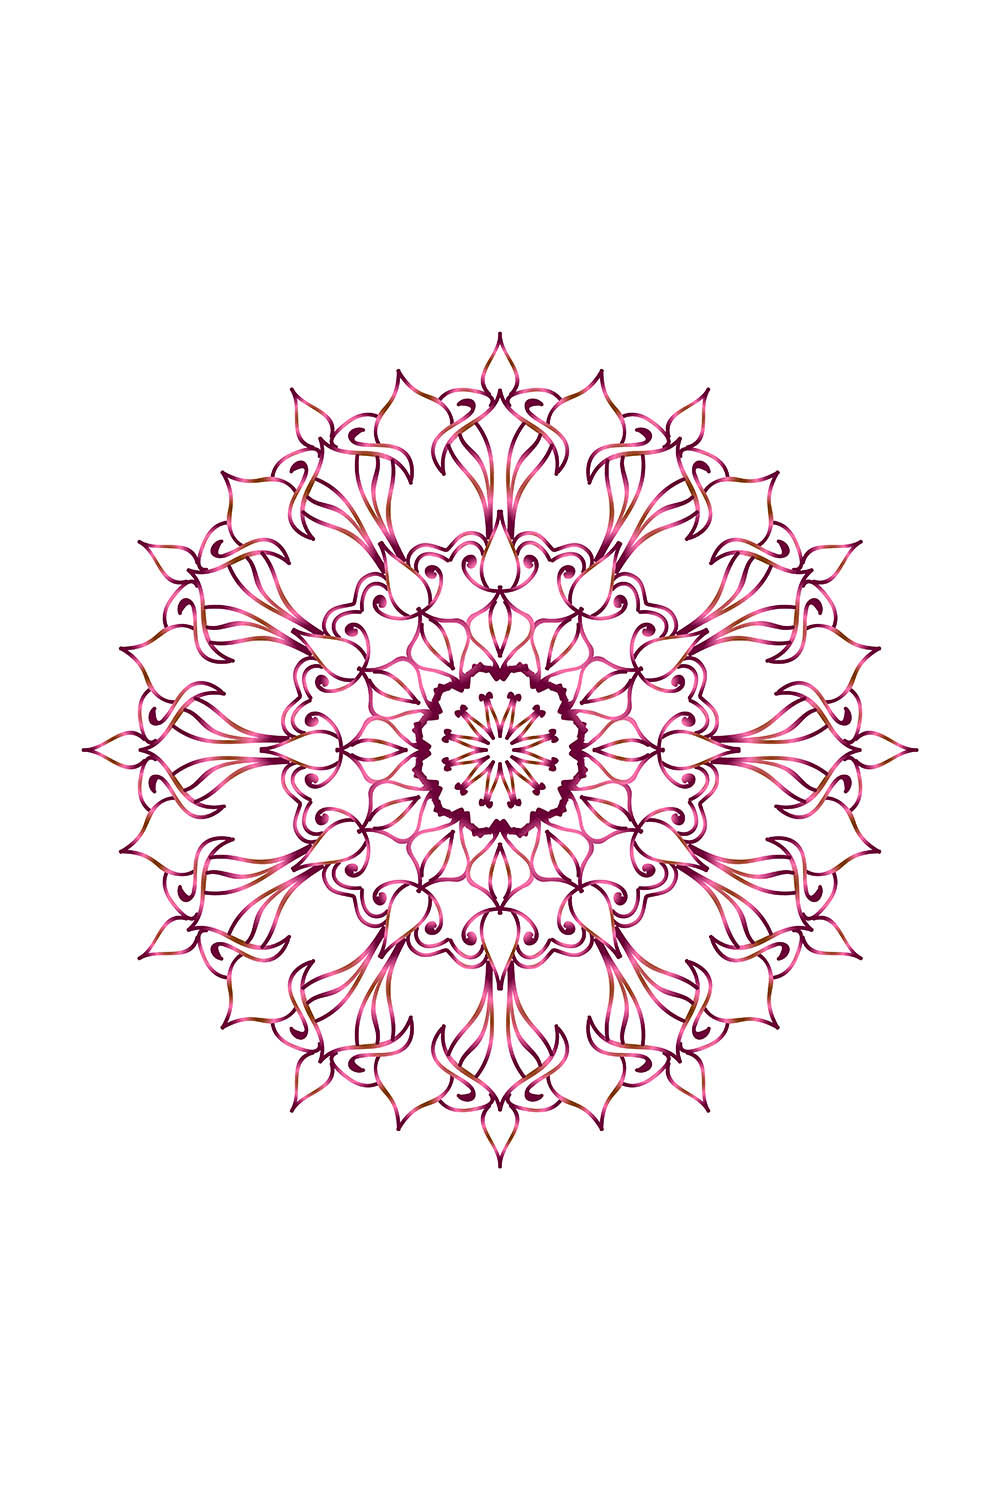 Meditation Mandala On Islamic Circles Vintage Flowers Abstract Unique Pattern With Wedding Card Background Design png classic images pinterest preview image.